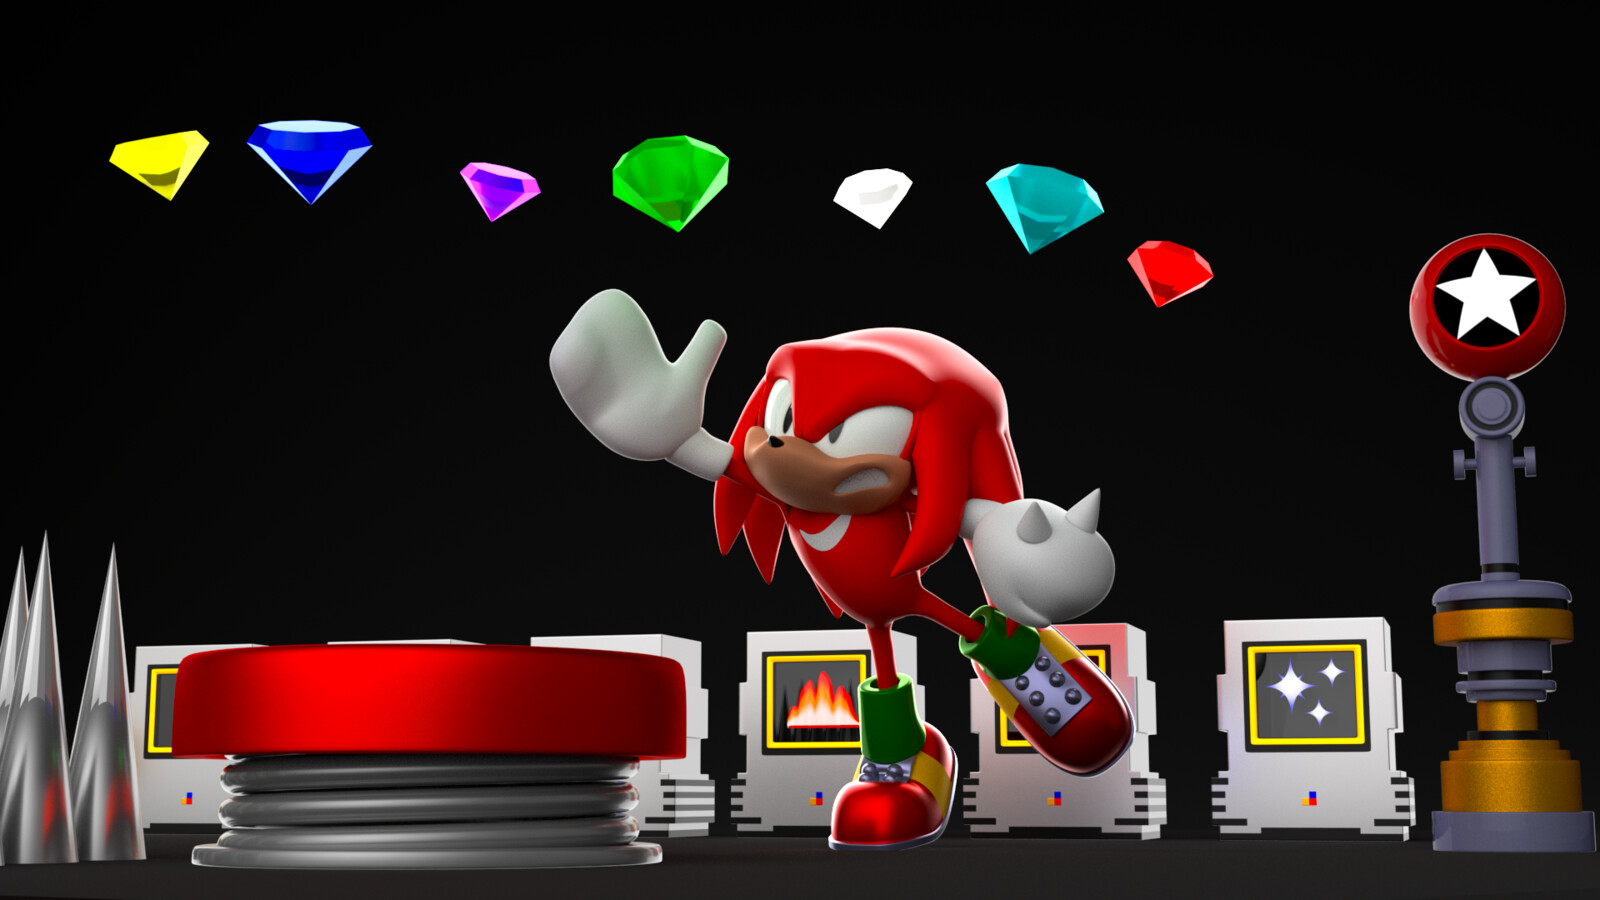 Knuckles wants the Chaos Emeralds back! Maybe if he jumped off the spring he'd reach them easier. I also made custom materials for Knuckles, but the original rig was by TheBlueBlur (https://gumroad.com/imeda3d#FjRiK)